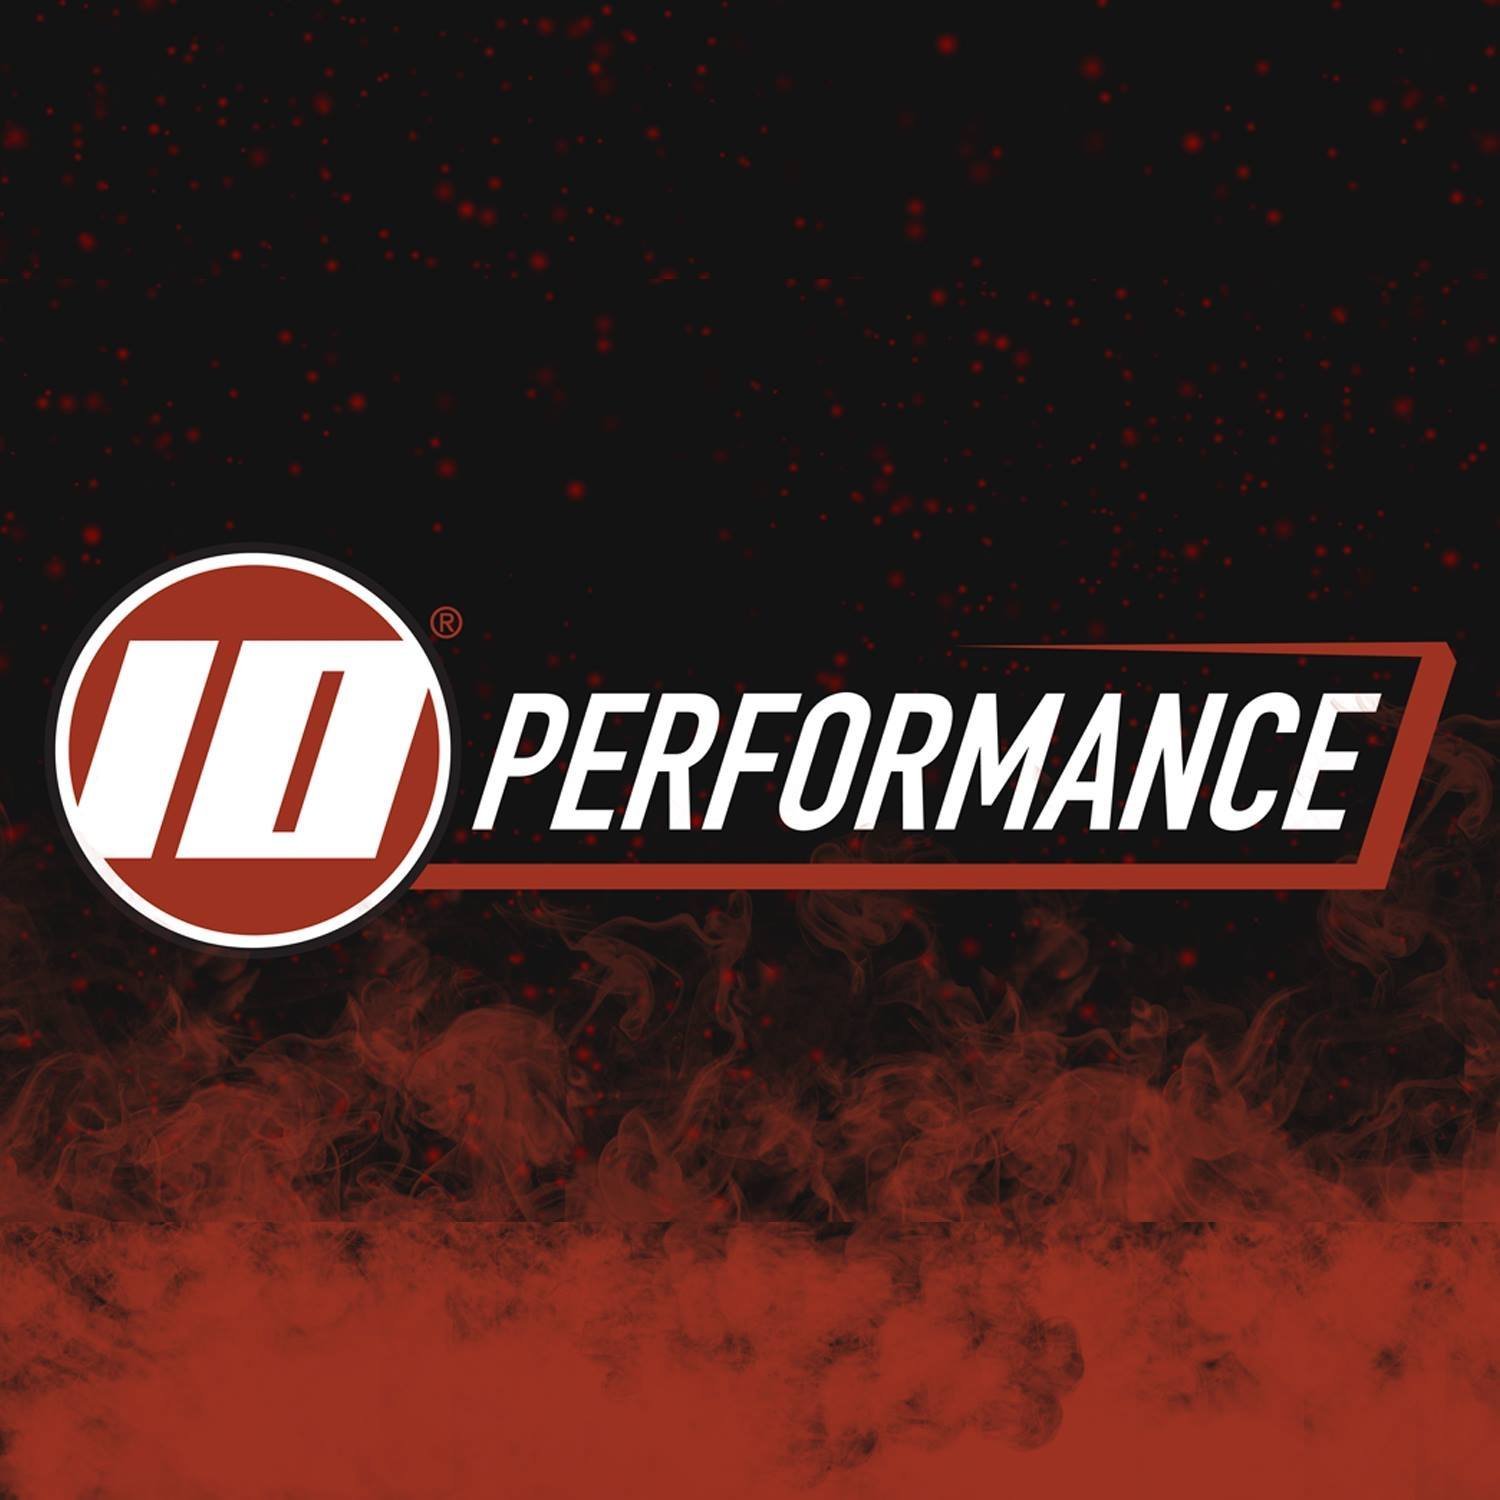 10 Performance offers a unique line of natural supplements designed to improve the way your body fuels and recovers.
PERFORM.RECOVER.REPEAT.